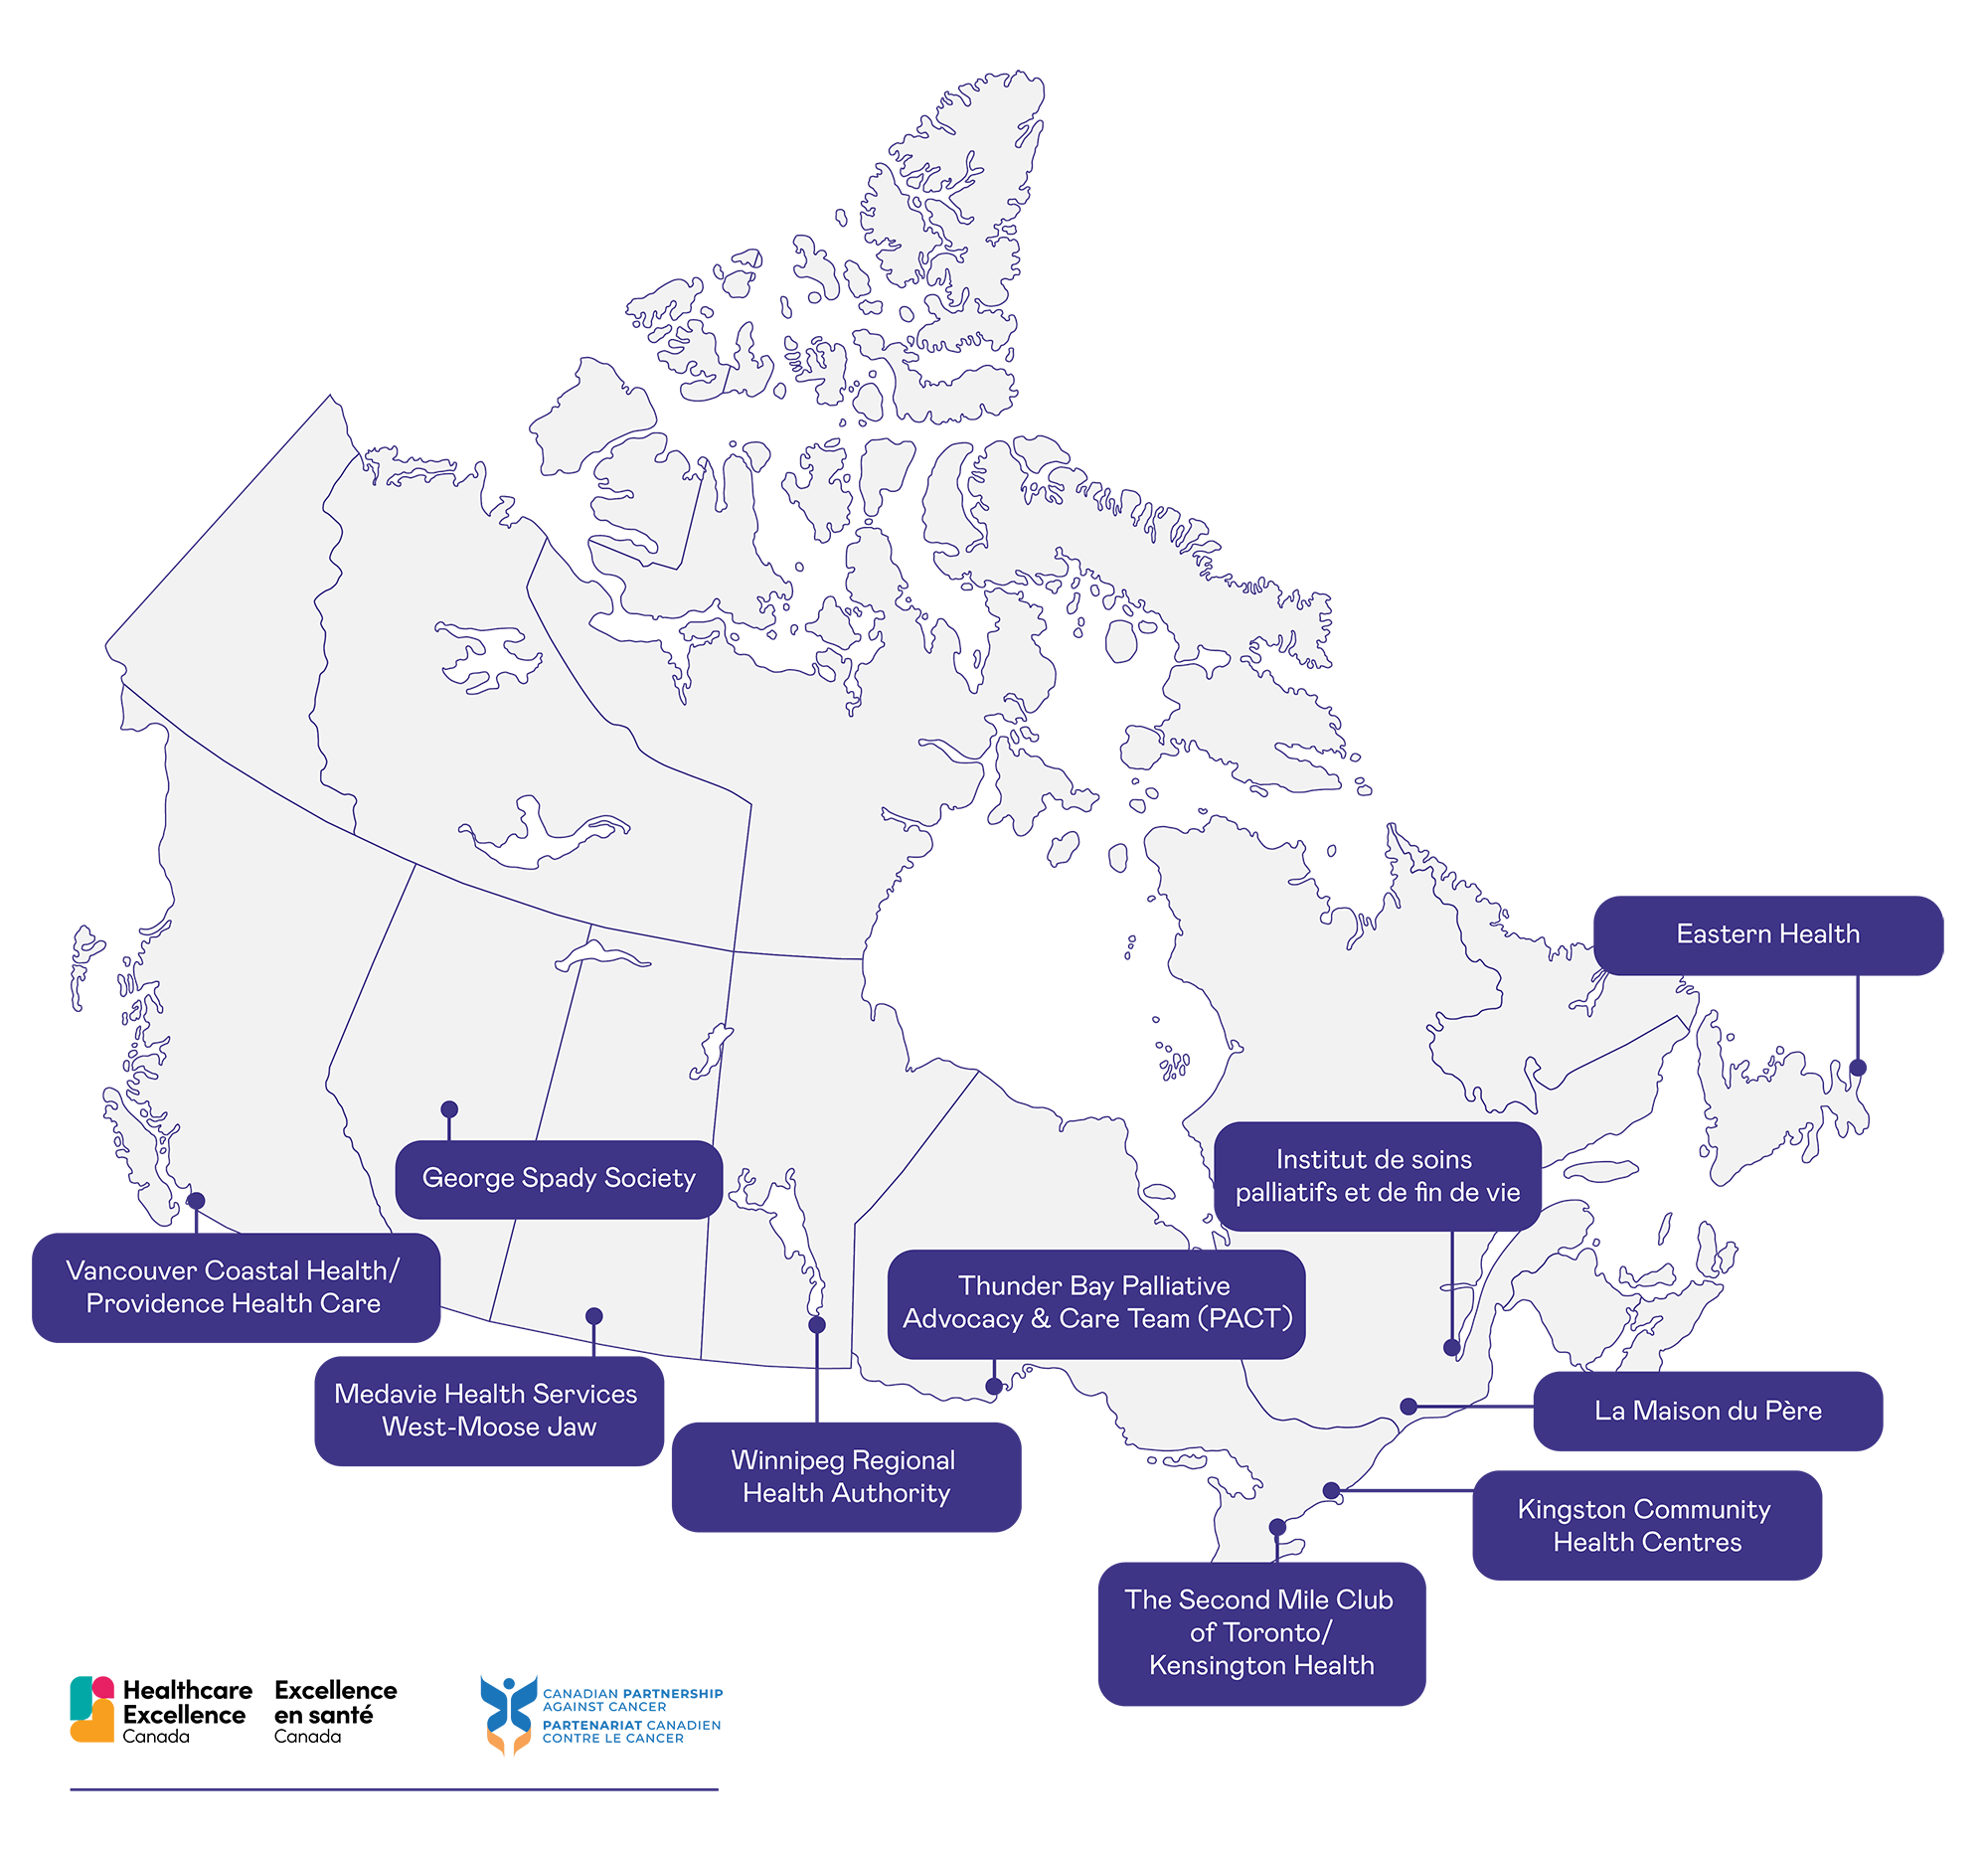 A map of Canada showing Vancouver Coastal Health/Providence Health Care in British Columbia; George Spady Society in Alberta; Medavie Health Services West-Moose Jaw in Saskatchewan; Winnipeg Regional Health Authority in Manitoba; NorWest Community Health Centres, The Second Mile Club of Toronto/Kensington Health and Kingston Community Health Centres in Ontario; Institut de soins palliatifs et de fin de vie and la Maison du Père in Quebec; and Eastern Health in Newfoundland and Labrador.